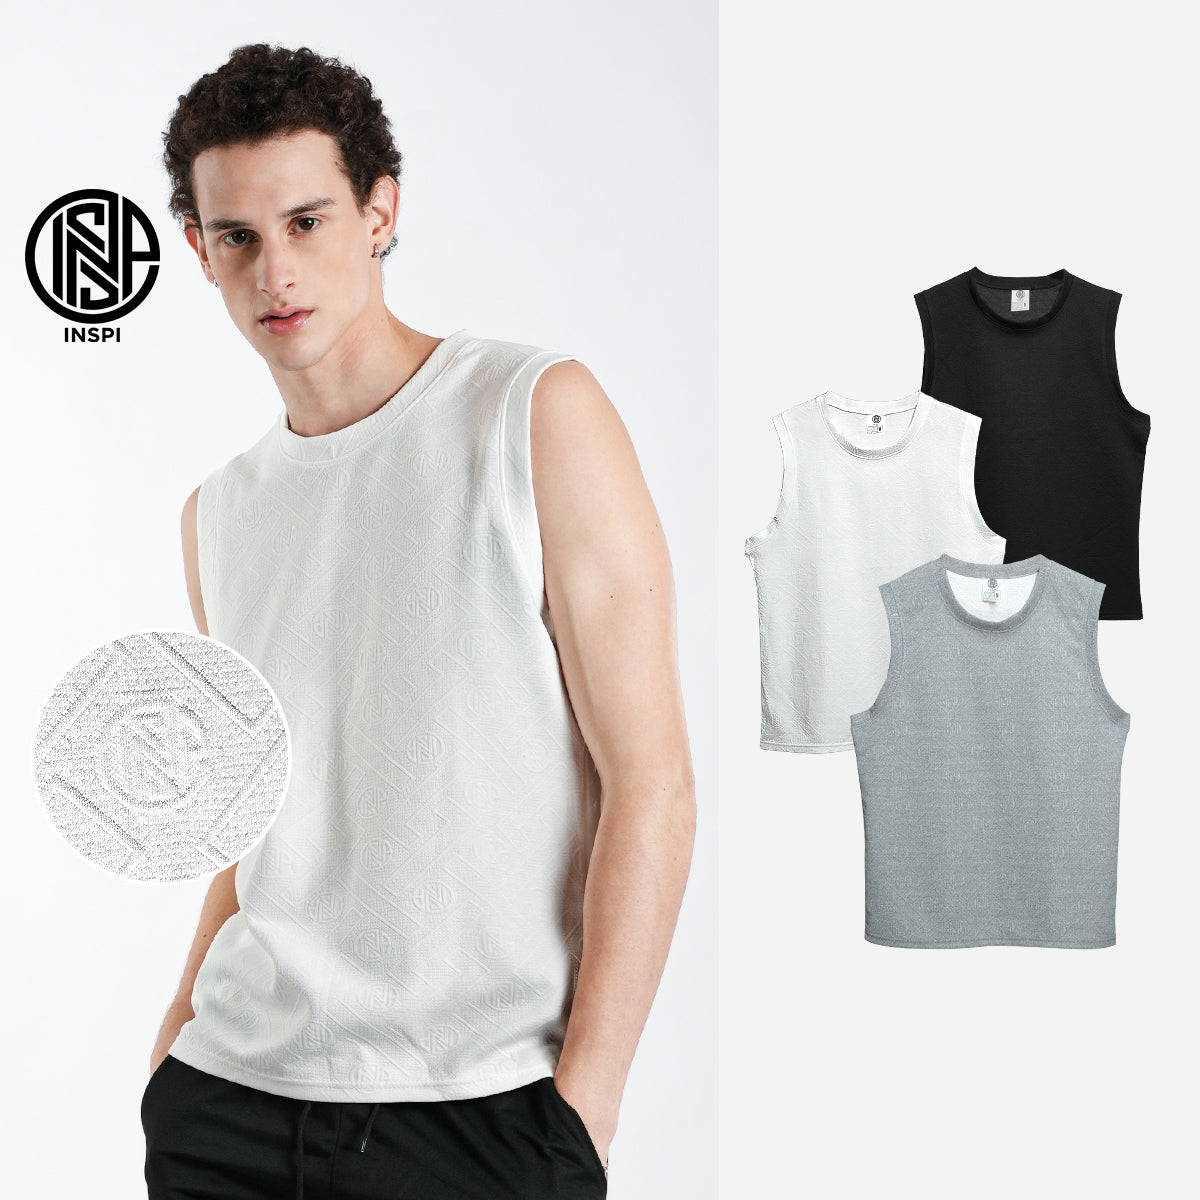 INSPI Textured Muscle Tee Originals White